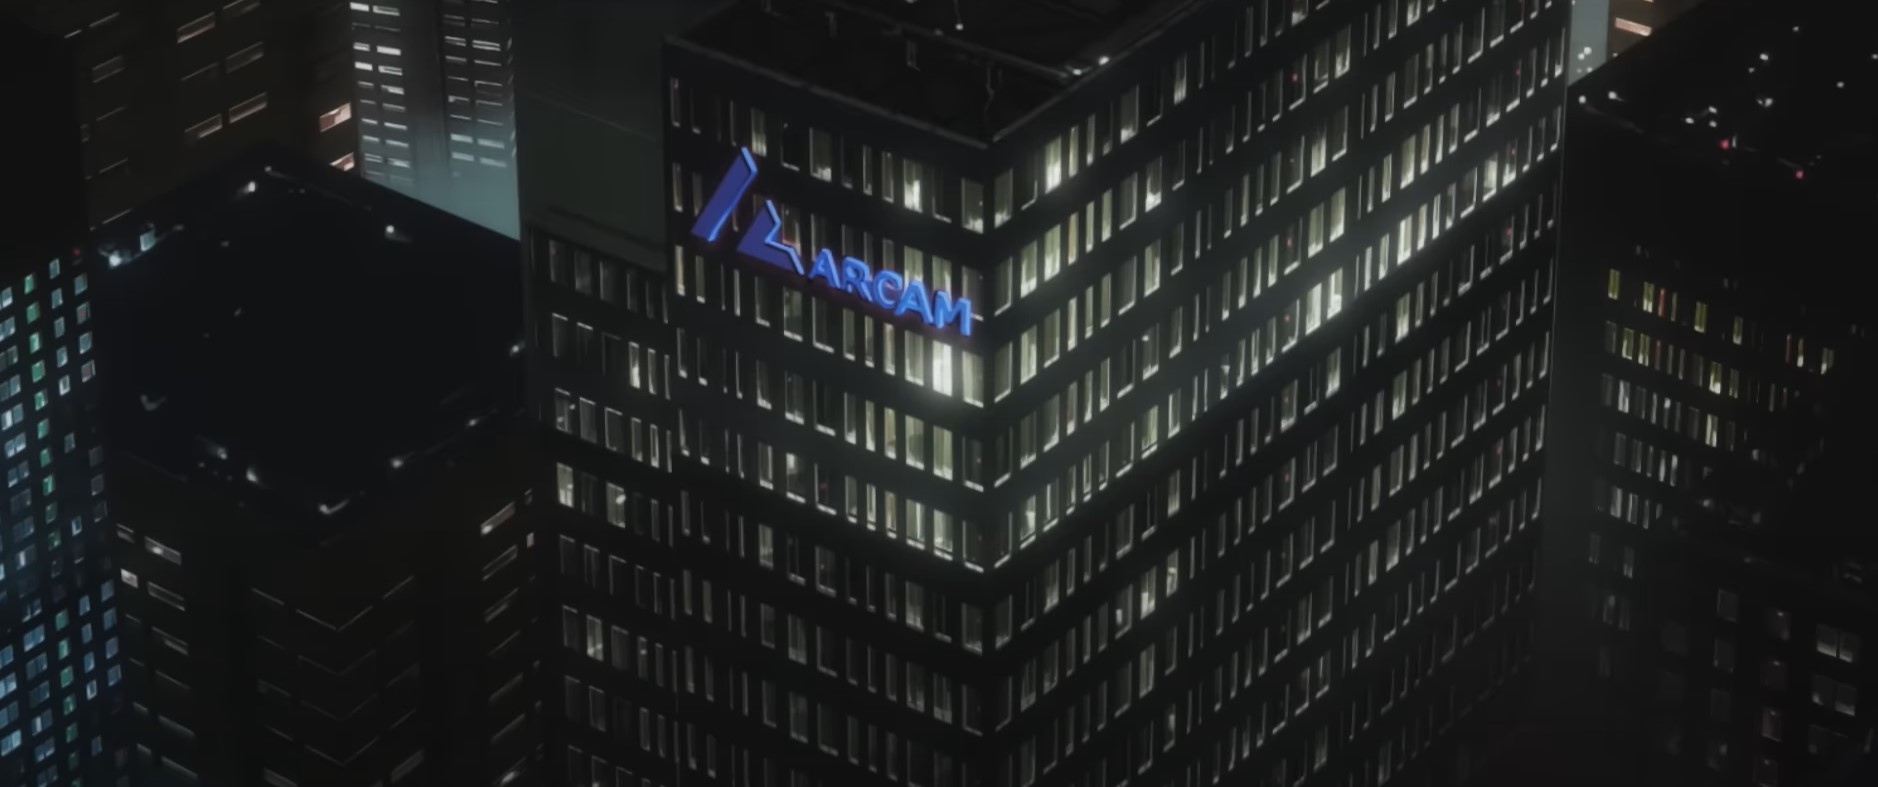 Is ARCAM Evil? Who Is Larry Markusson?